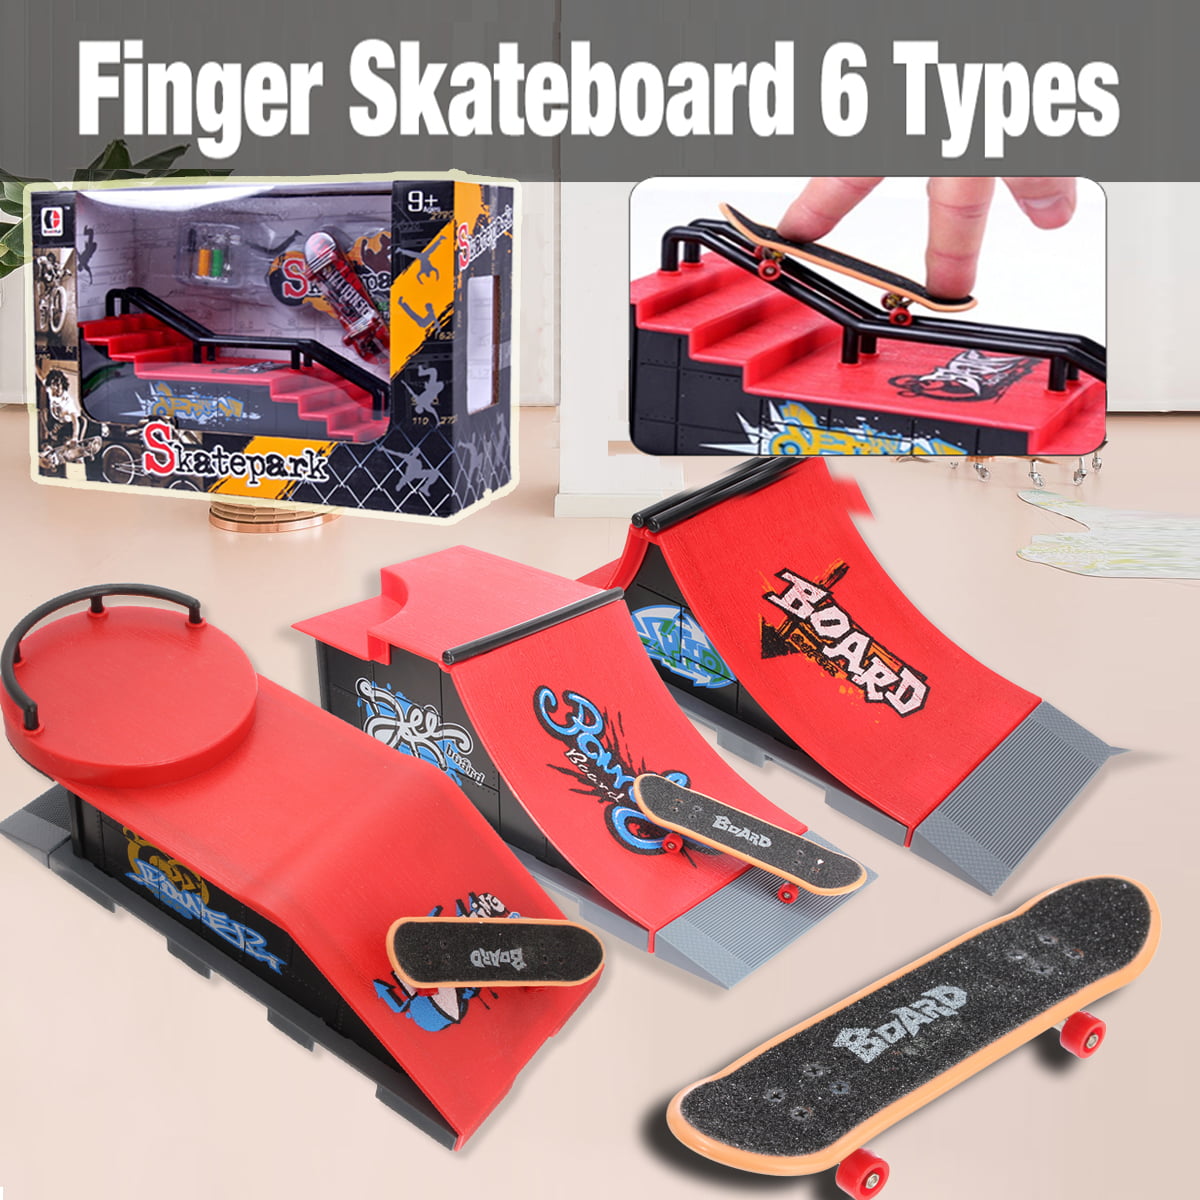 Tech Deck Fingerboard With Rail Finger Skate Board Park Ramp Parts Scooter NEW 